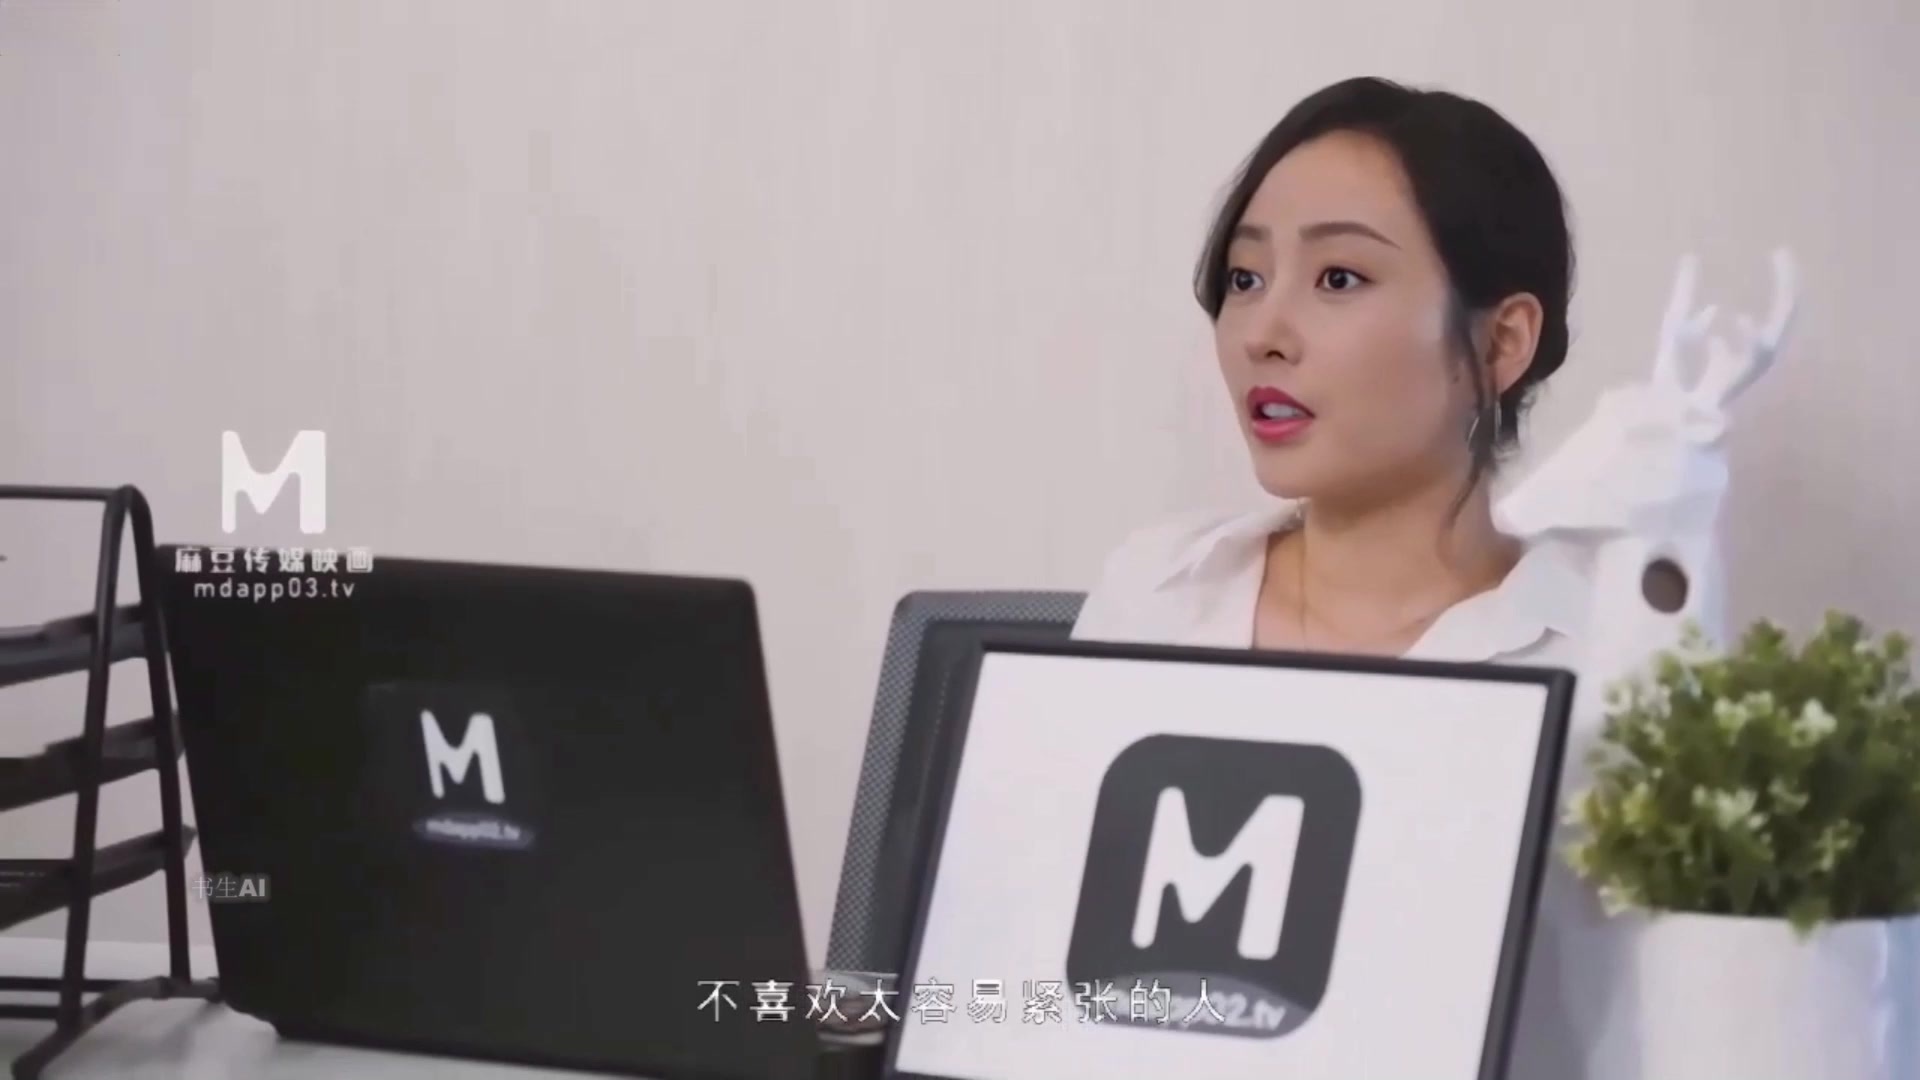 Couple had a good time in the office, Zhang Tian'ai ai (张天爱 真假) [PREMIUM]